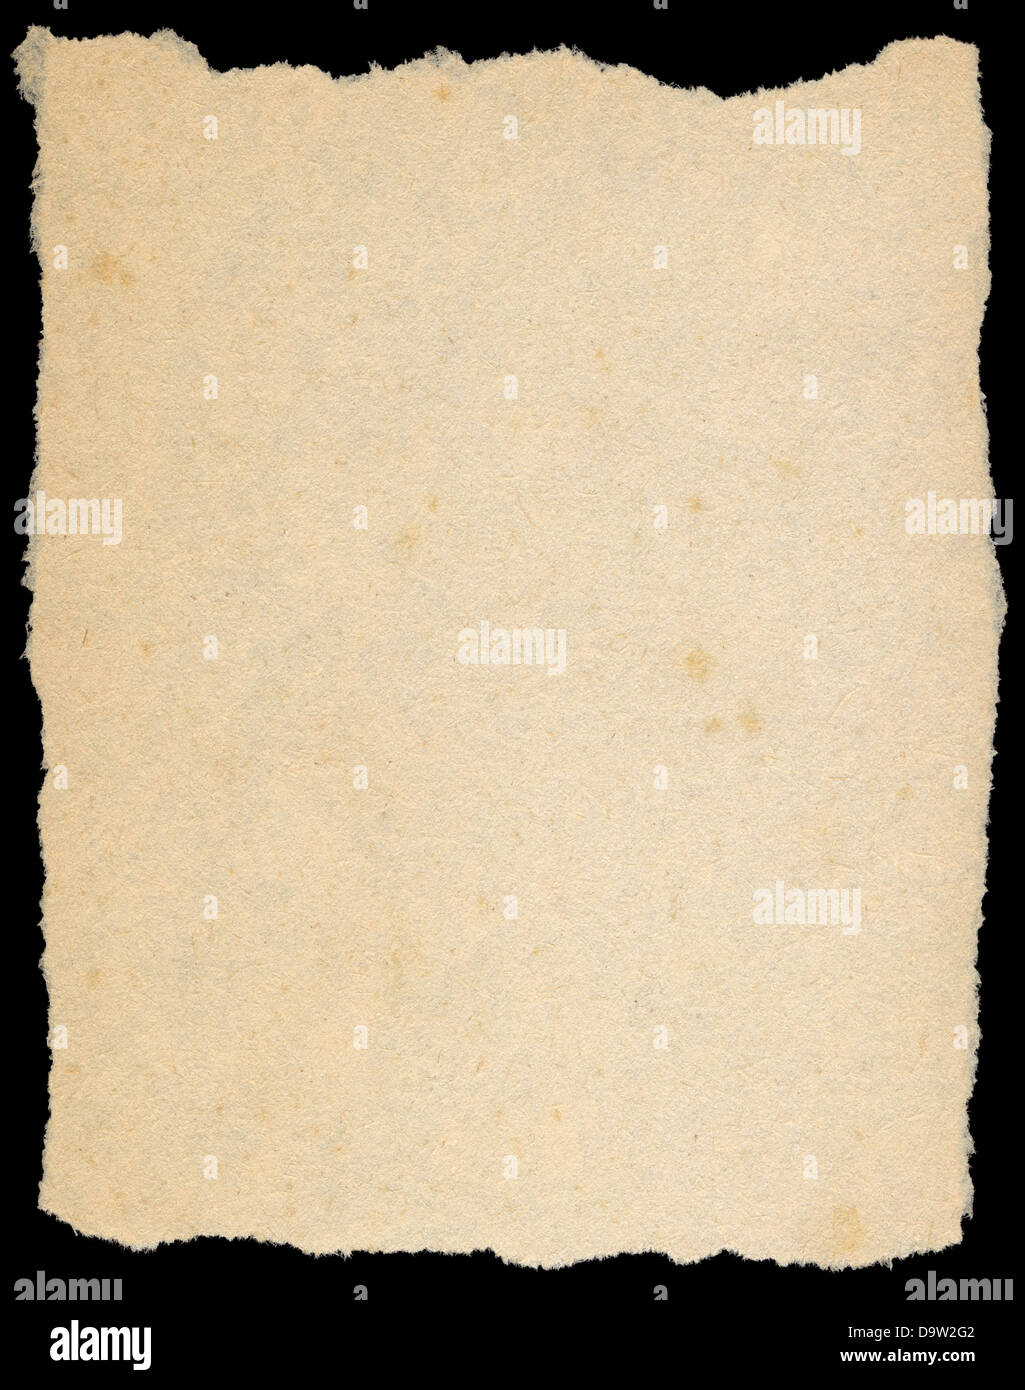 Old paper background. Yellow aged paper Stock Photo - Alamy